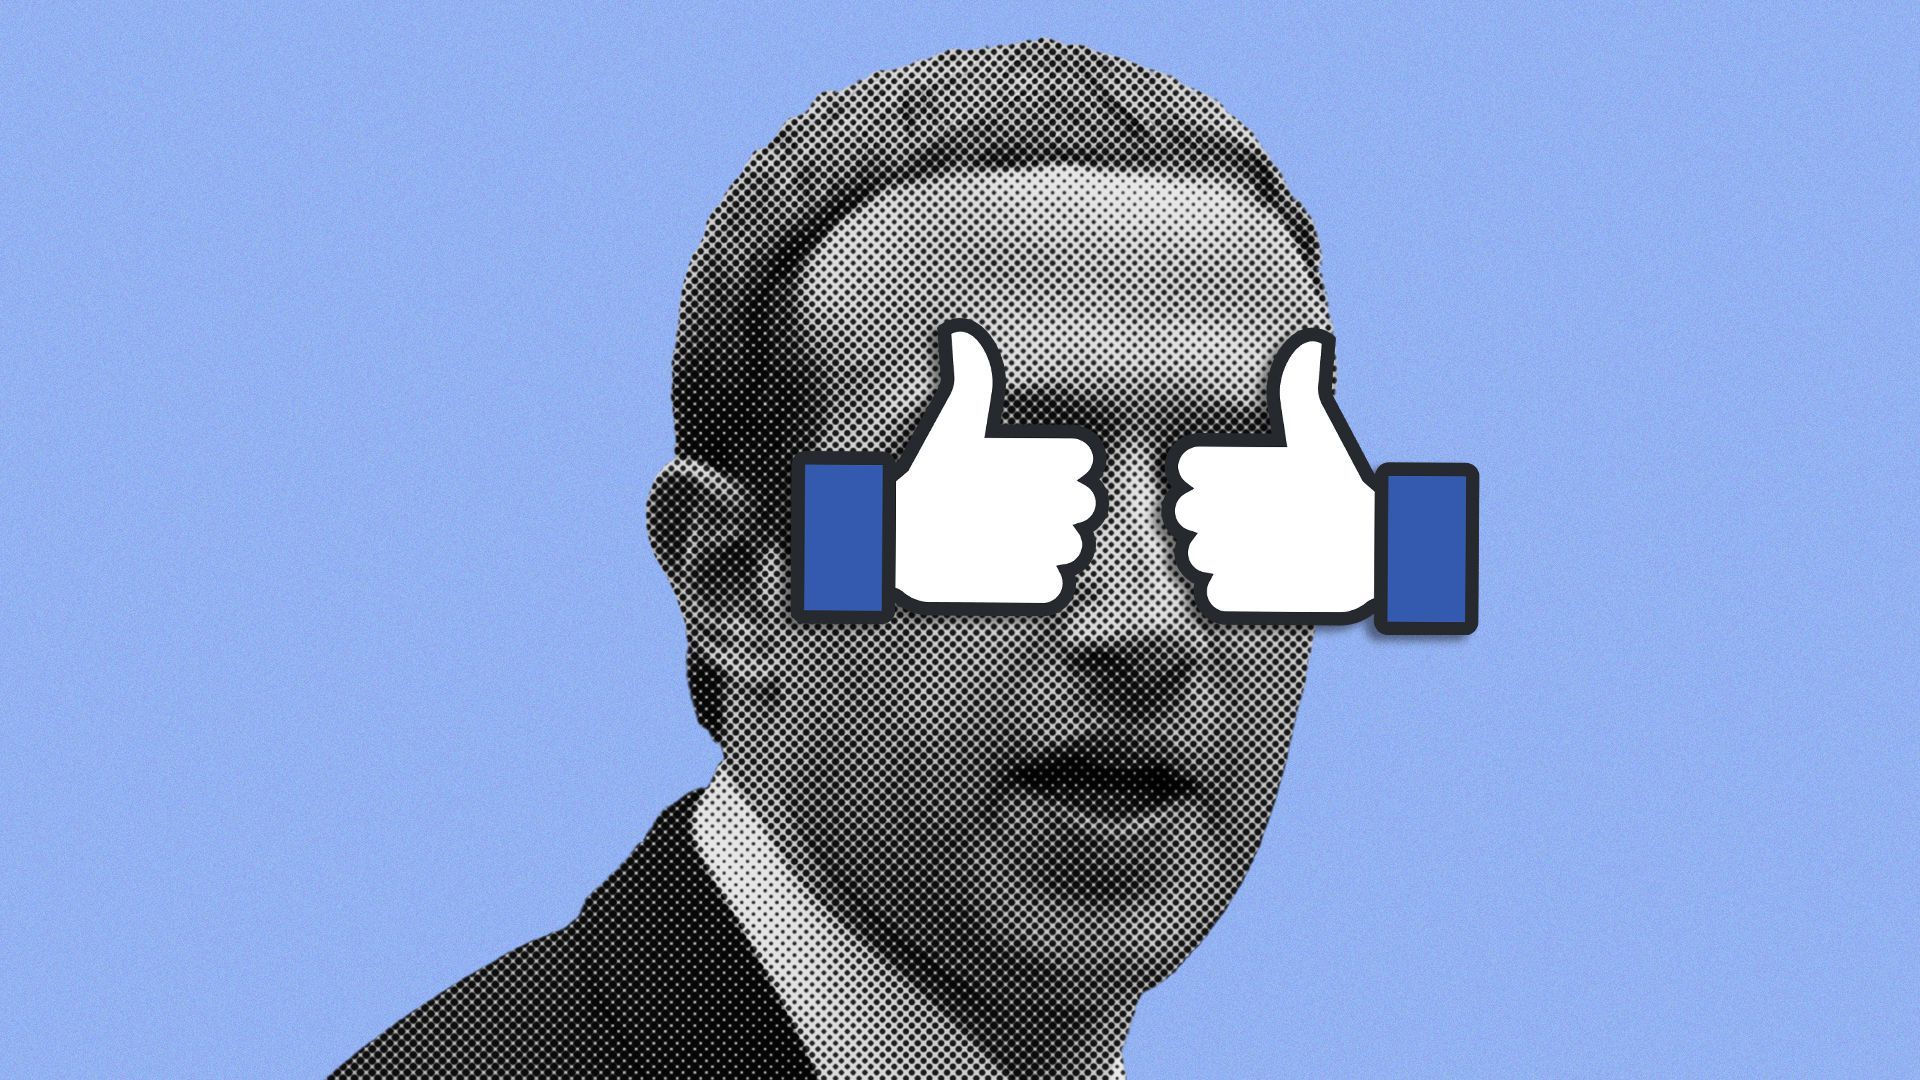 Photo illustration of Mark Zuckerberg with Facebook's "Like" thumbs covering his eyes.